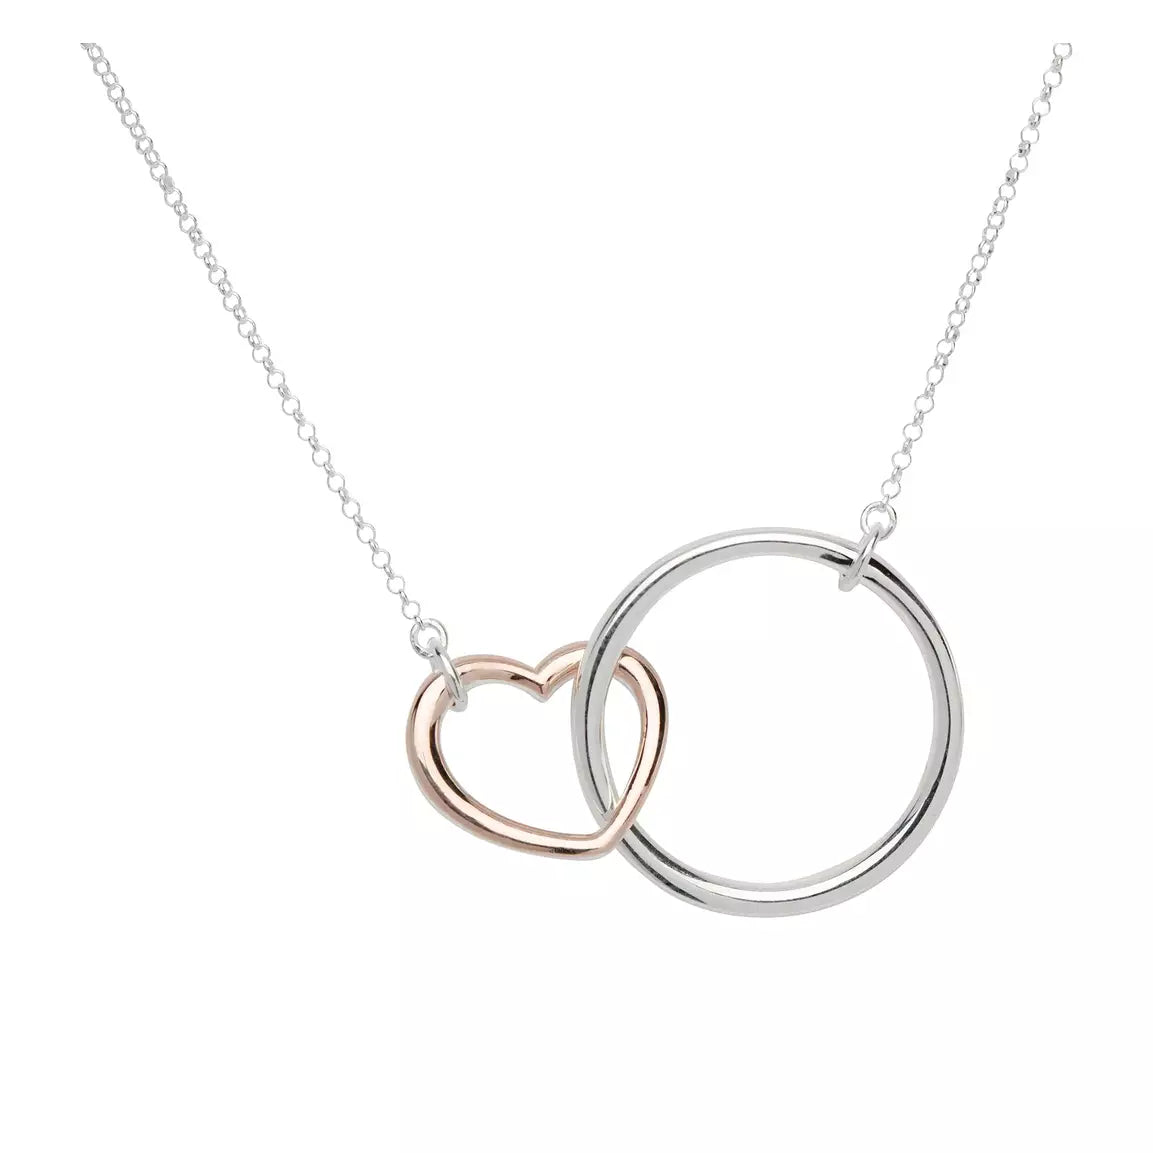 Silver and rose gold detail interlocking heart and circle pendant